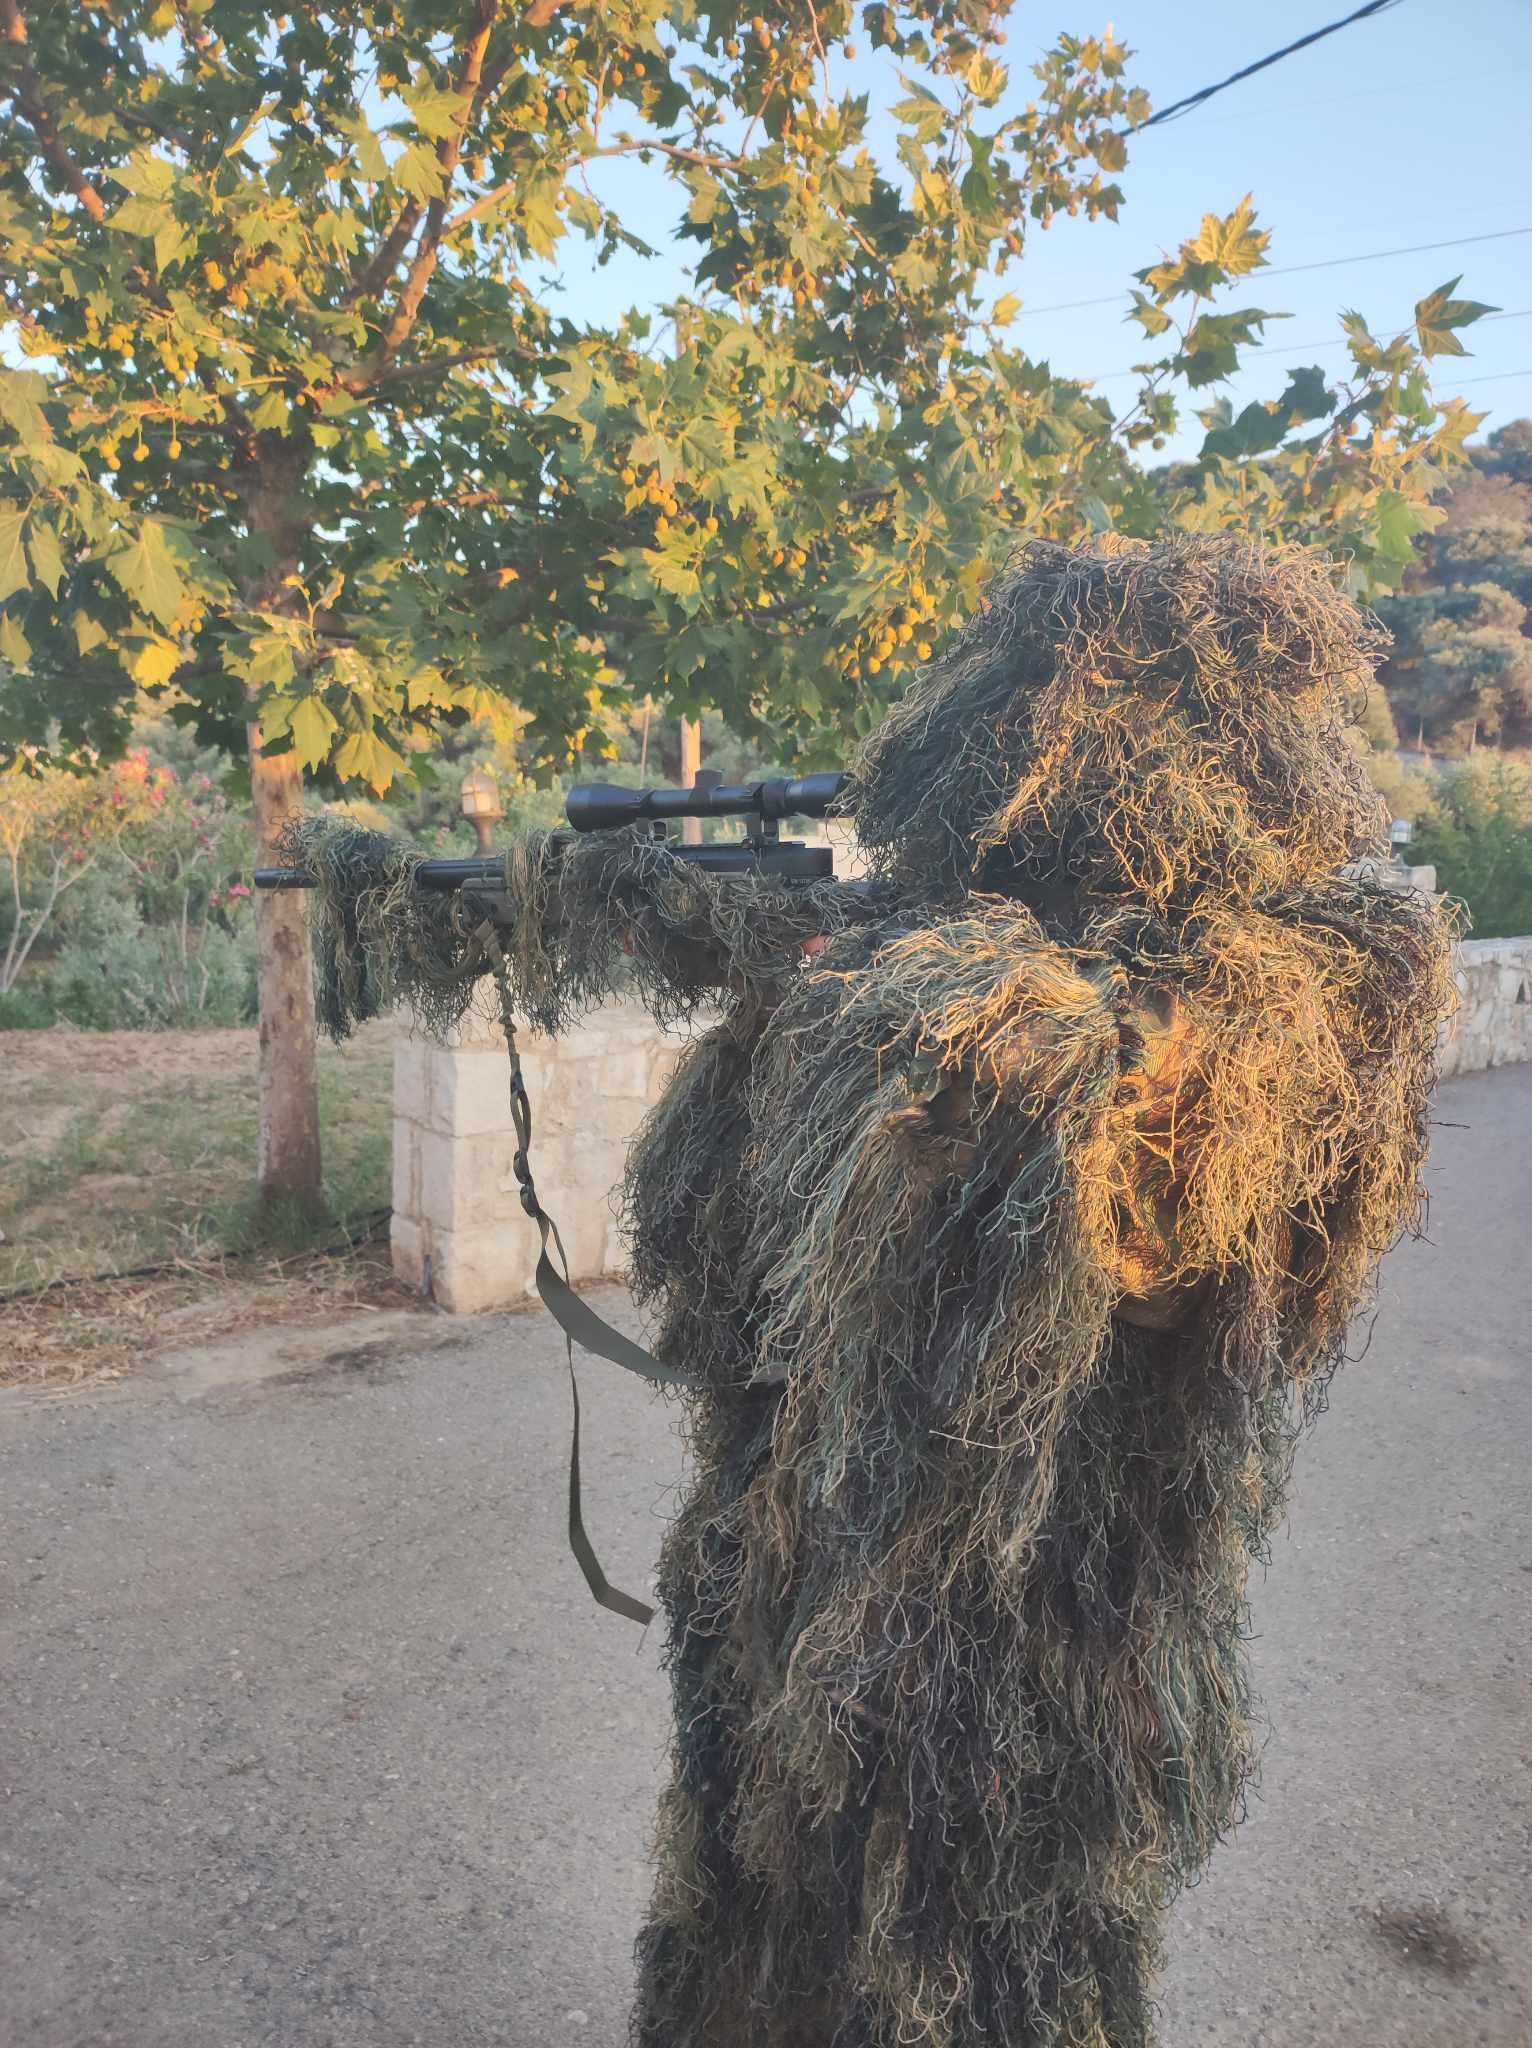 Airsoft Sniper L96 with x8 scope and Guilie suit mil-tec καμουφλάζ